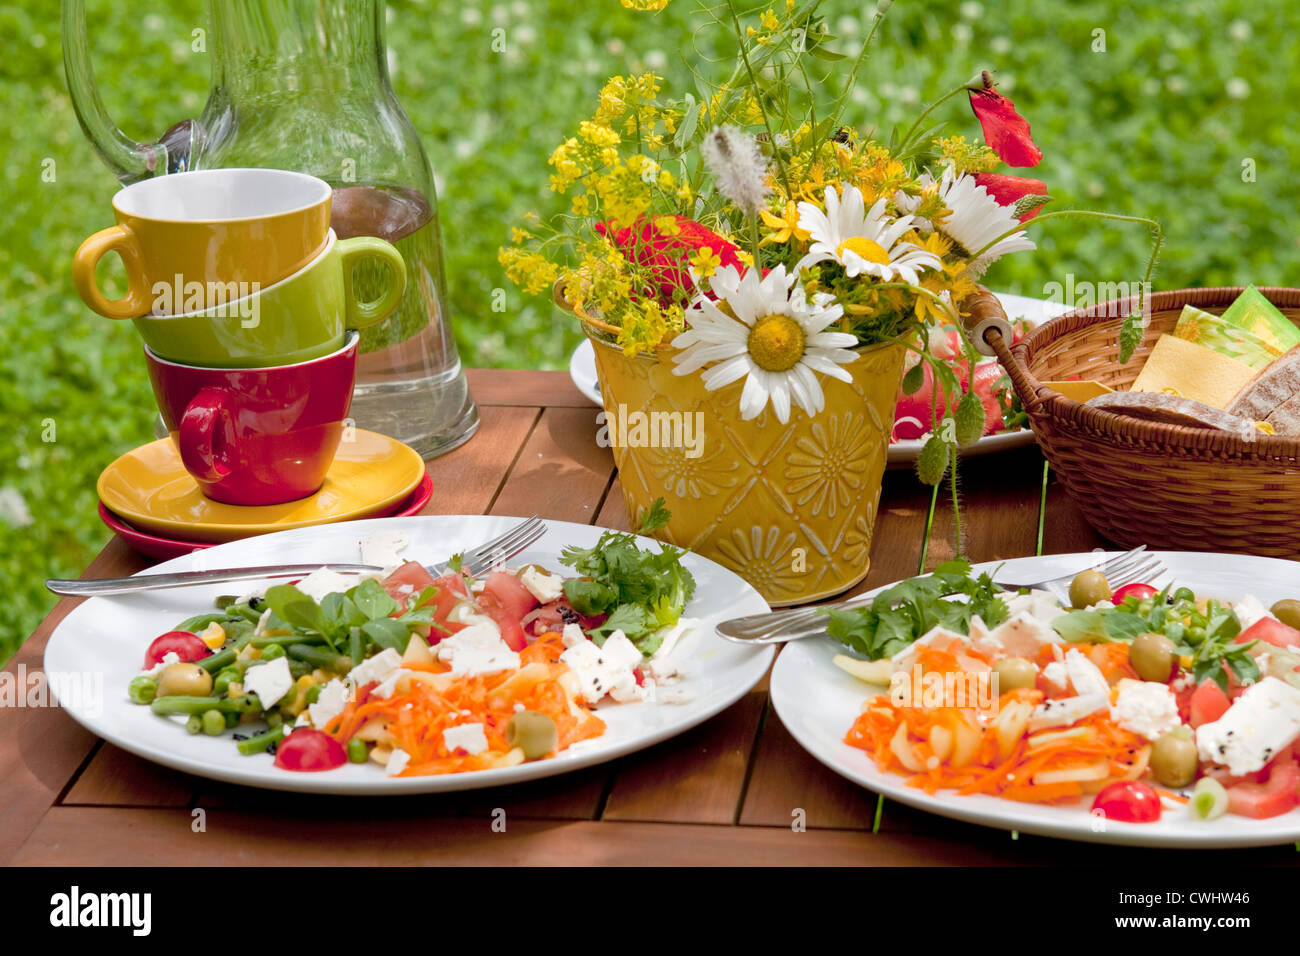 Summer Food and Drink Stock Photo - Alamy